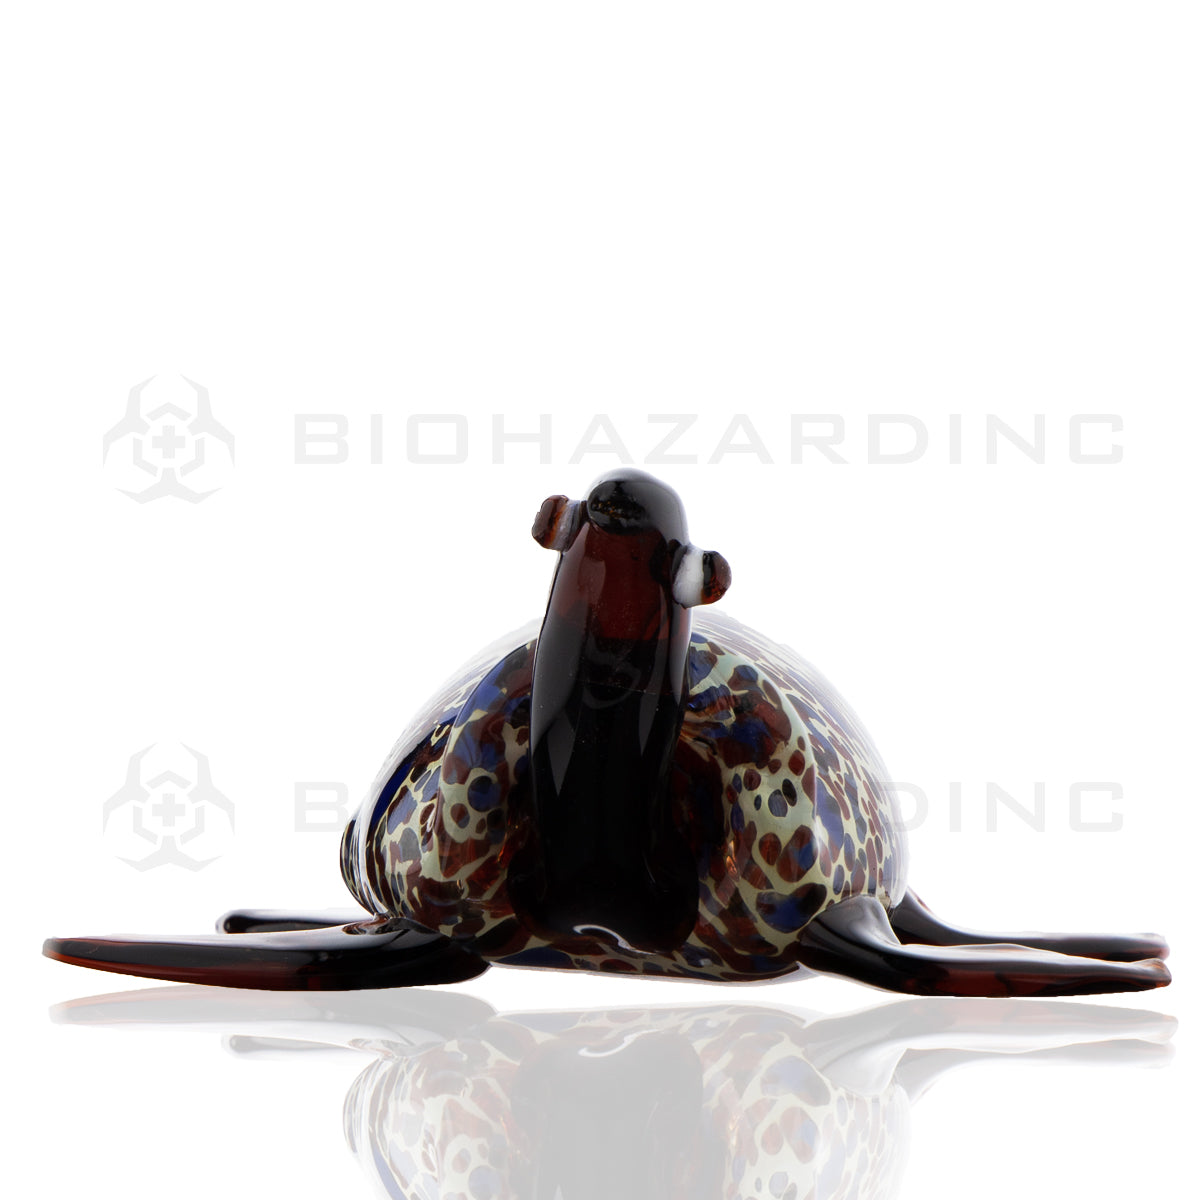 Novelty | Turtle Glass Hand Pipe | 5" - Glass - Brown Novelty Hand Pipe Biohazard Inc   